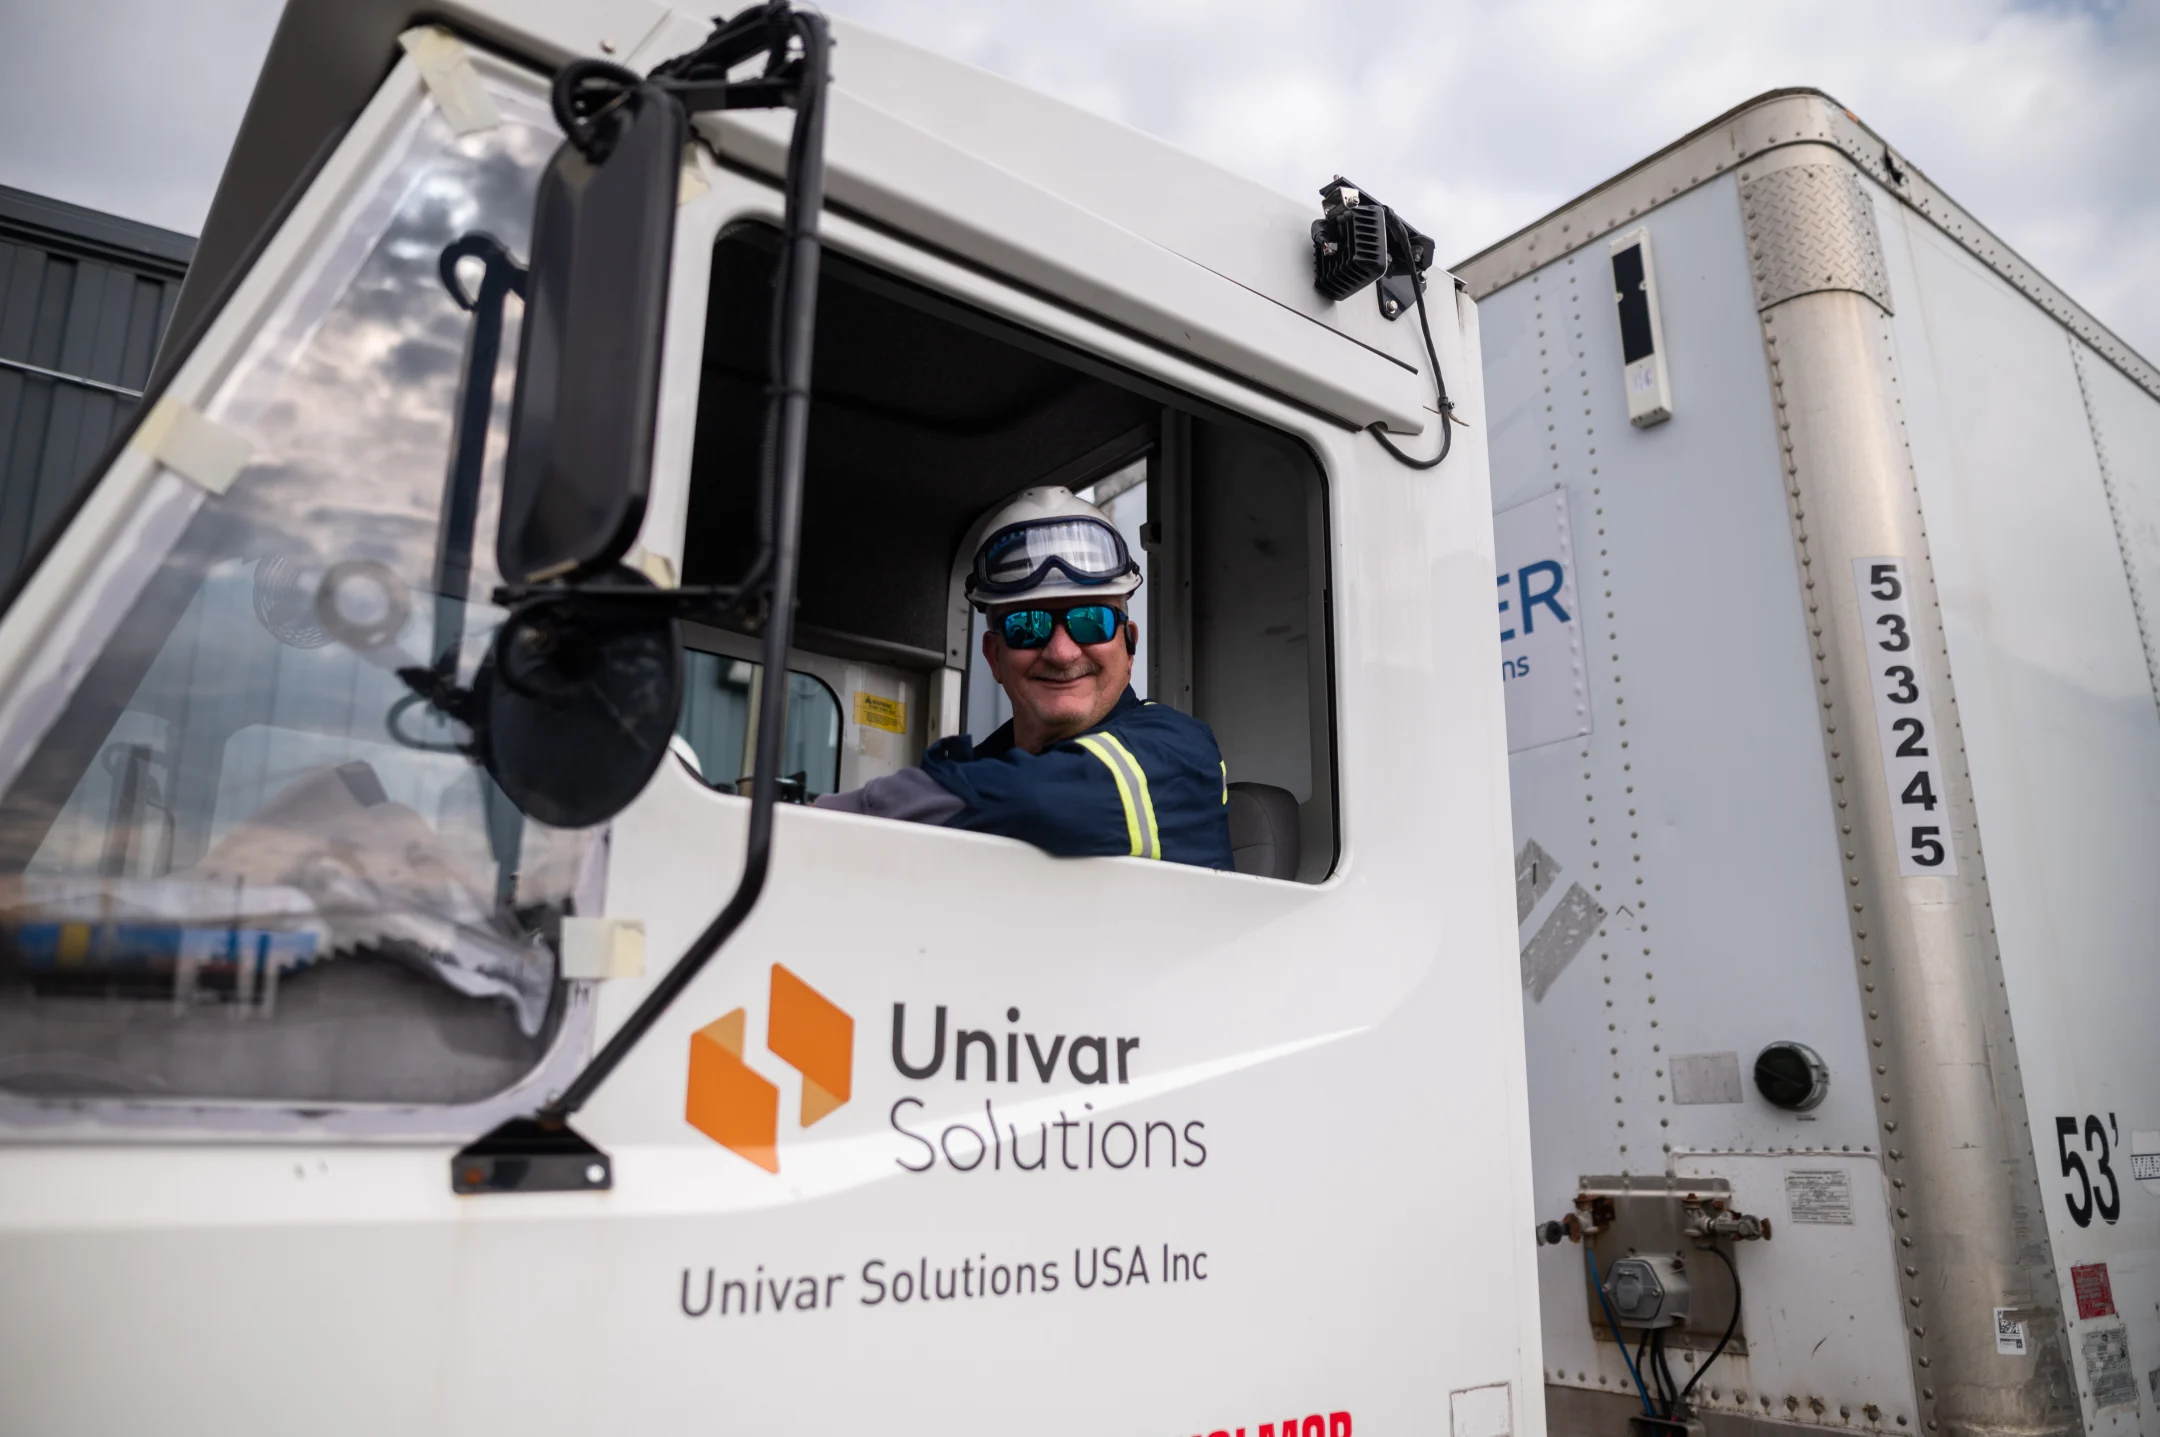 Univar Solutions makes their data a competitive advantage, reducing harsh events by 40%+